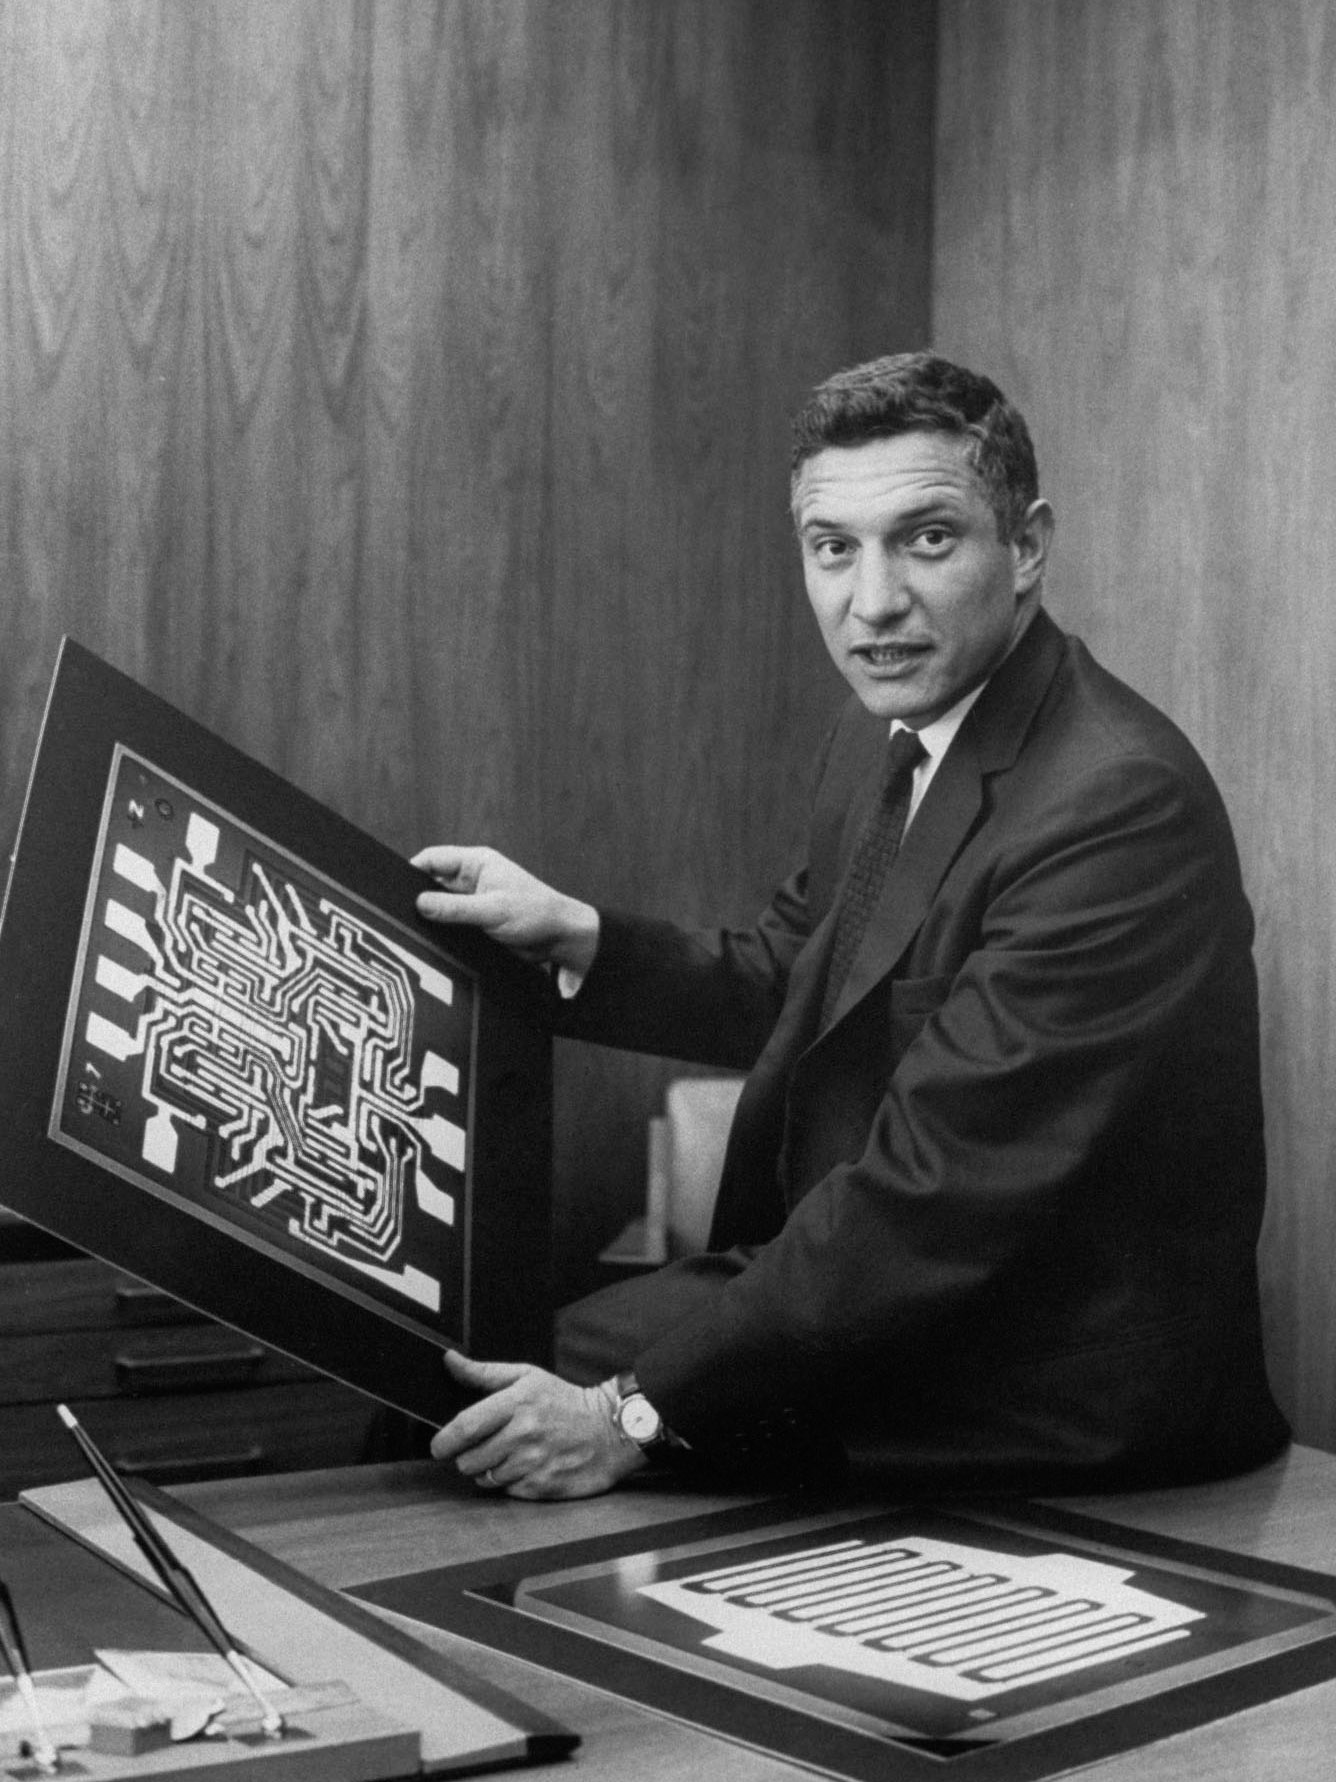 Robert Noyce in his office at Fairchild Semiconductor holding schematics of semiconductors.